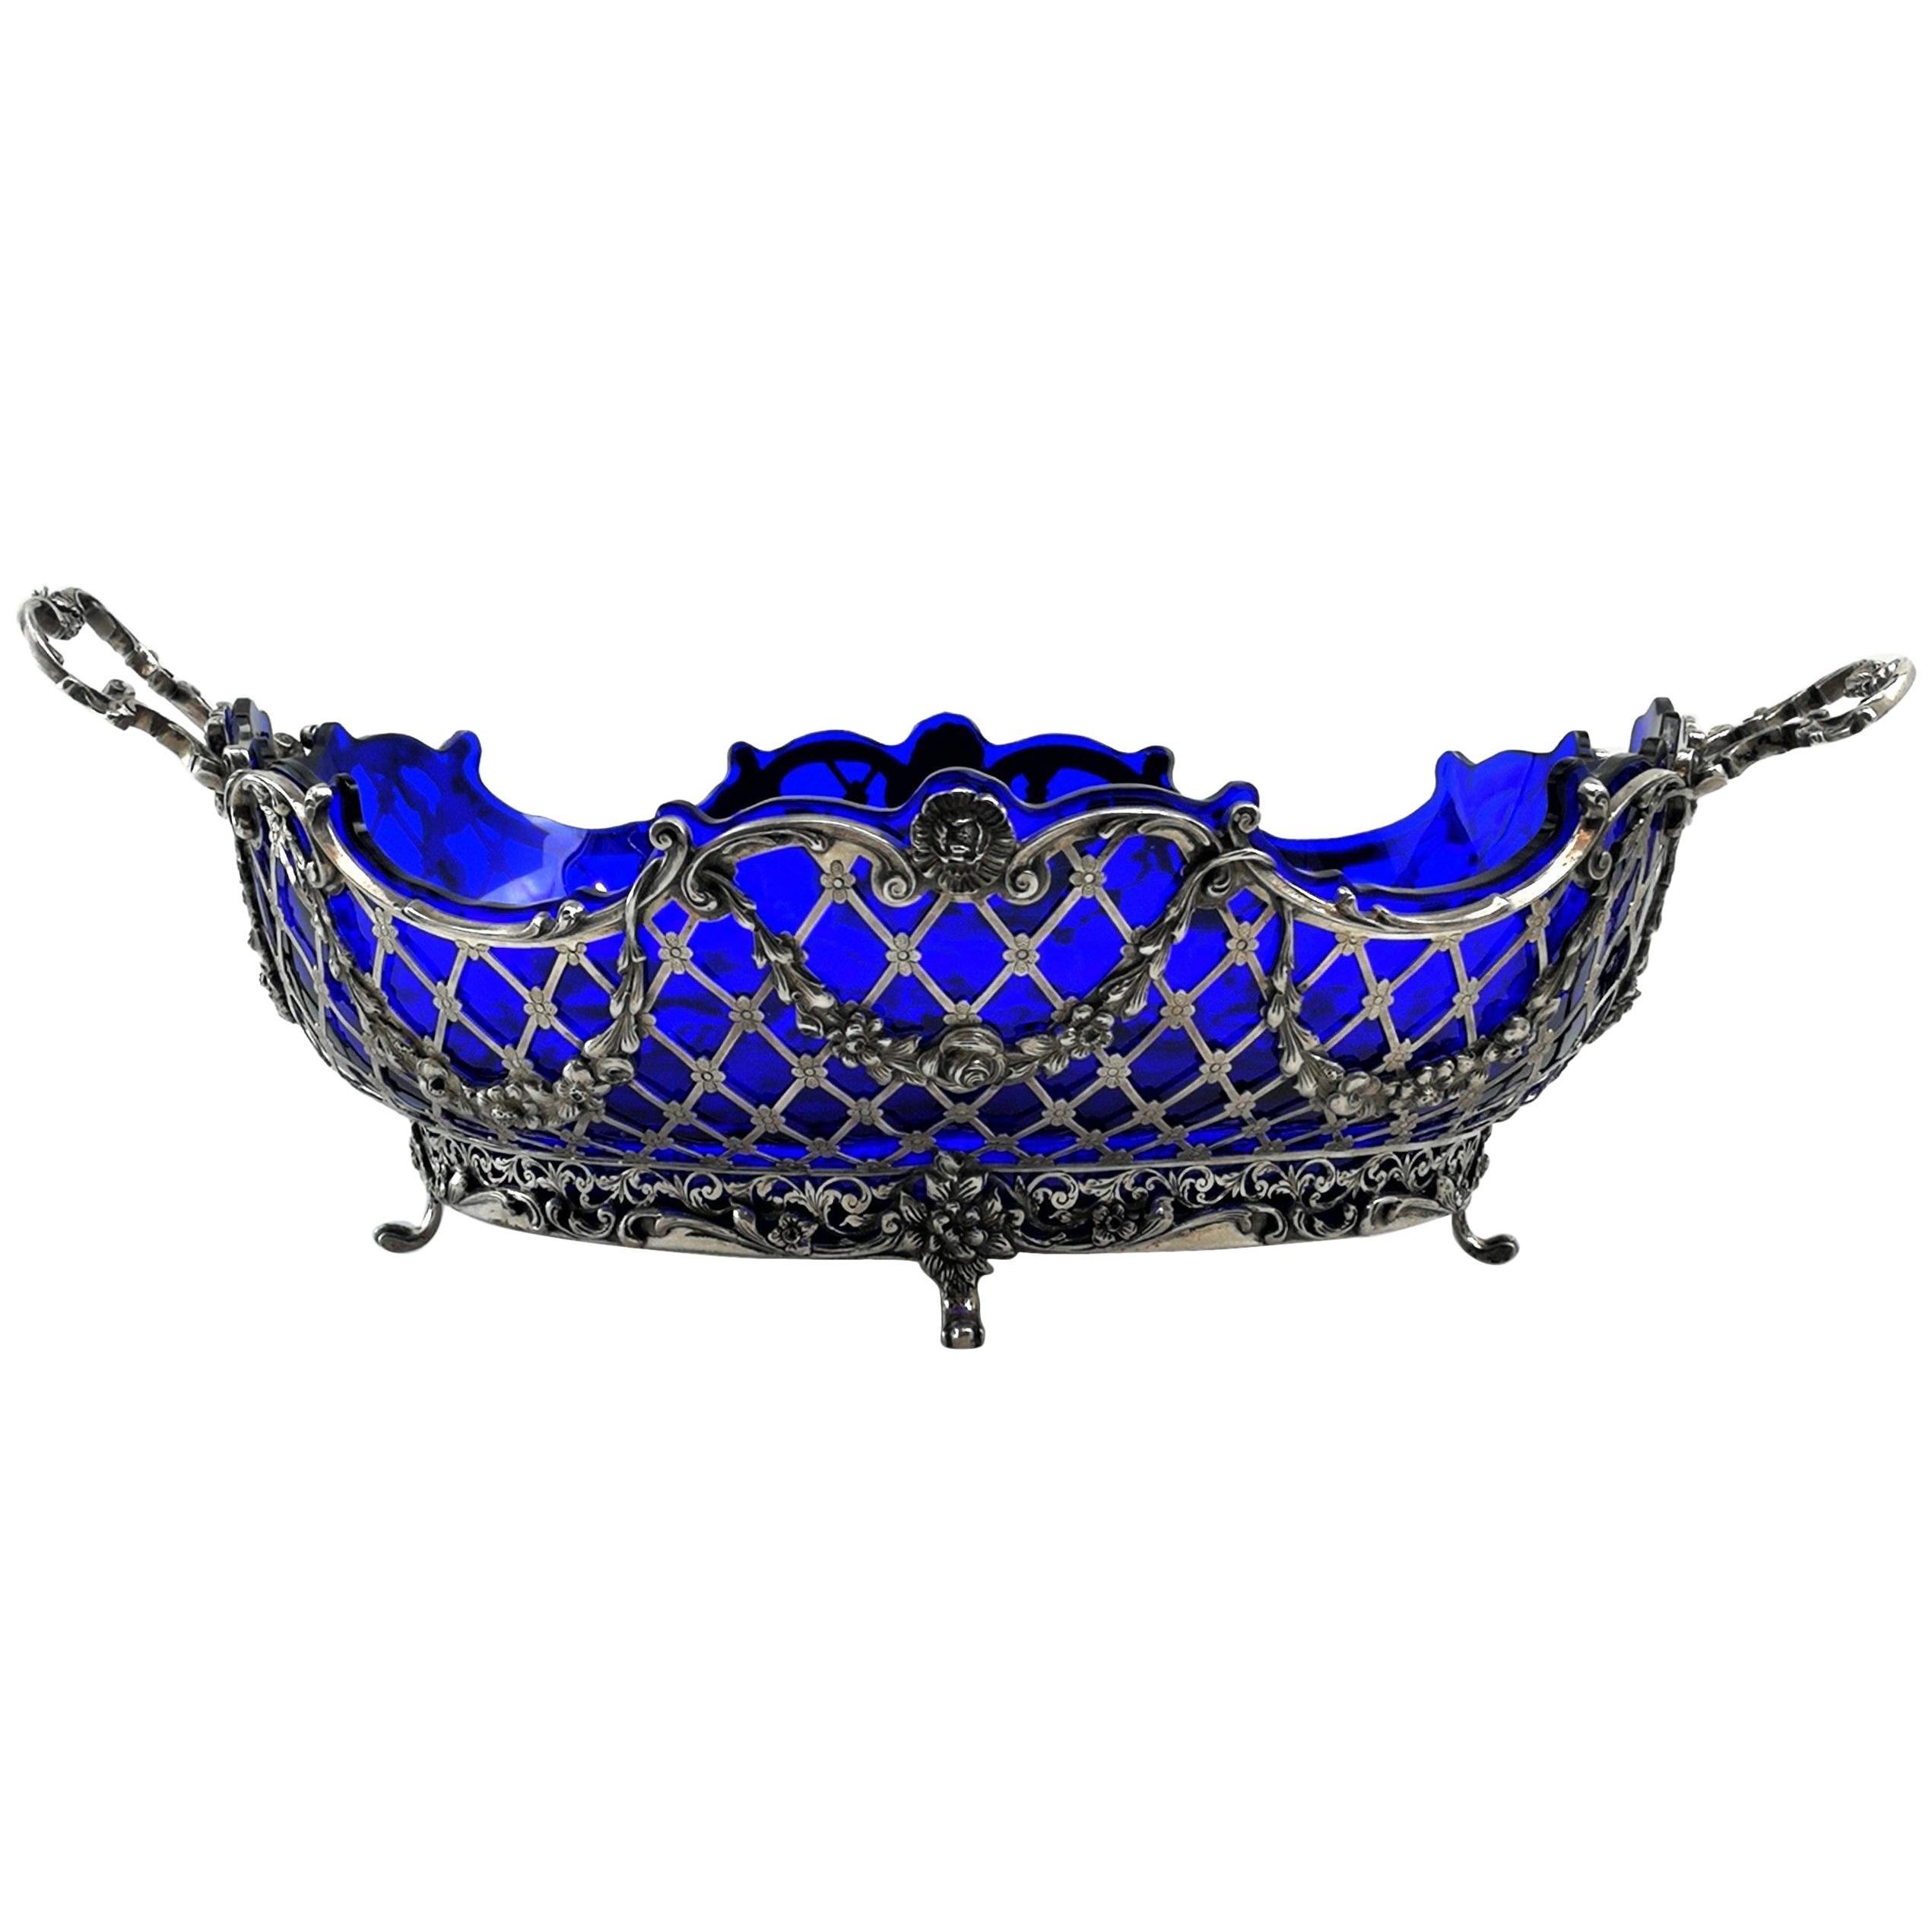 Large Antique German Solid Silver and Glass Basket / Bowl, circa 1890